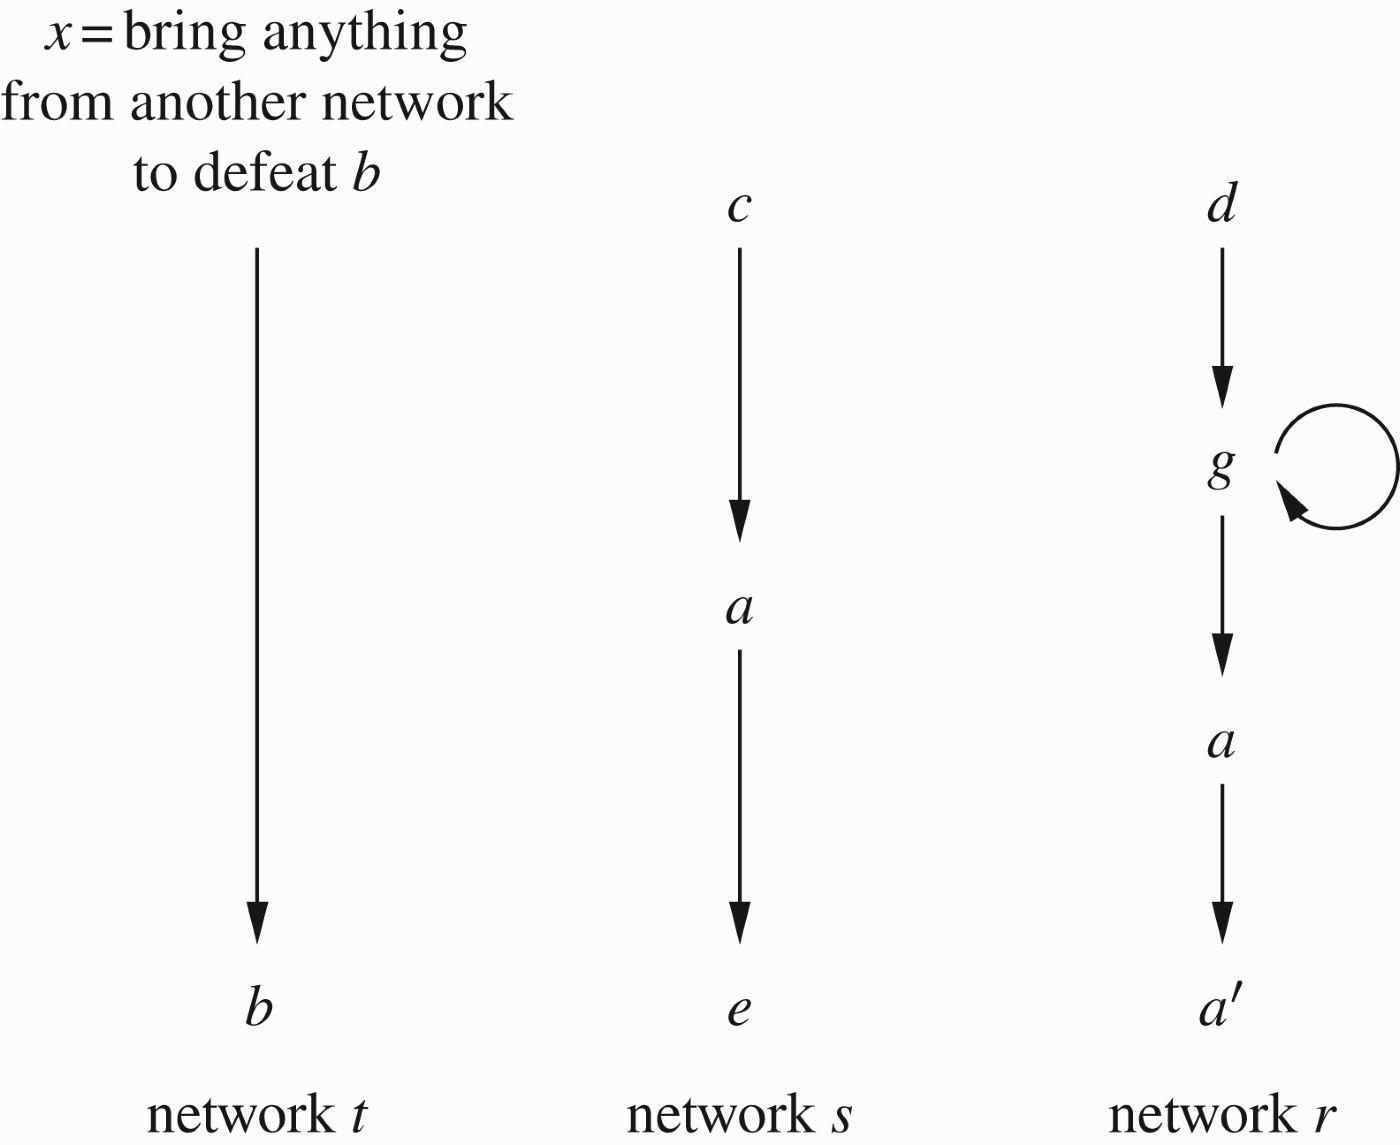 Networks related by instructions.